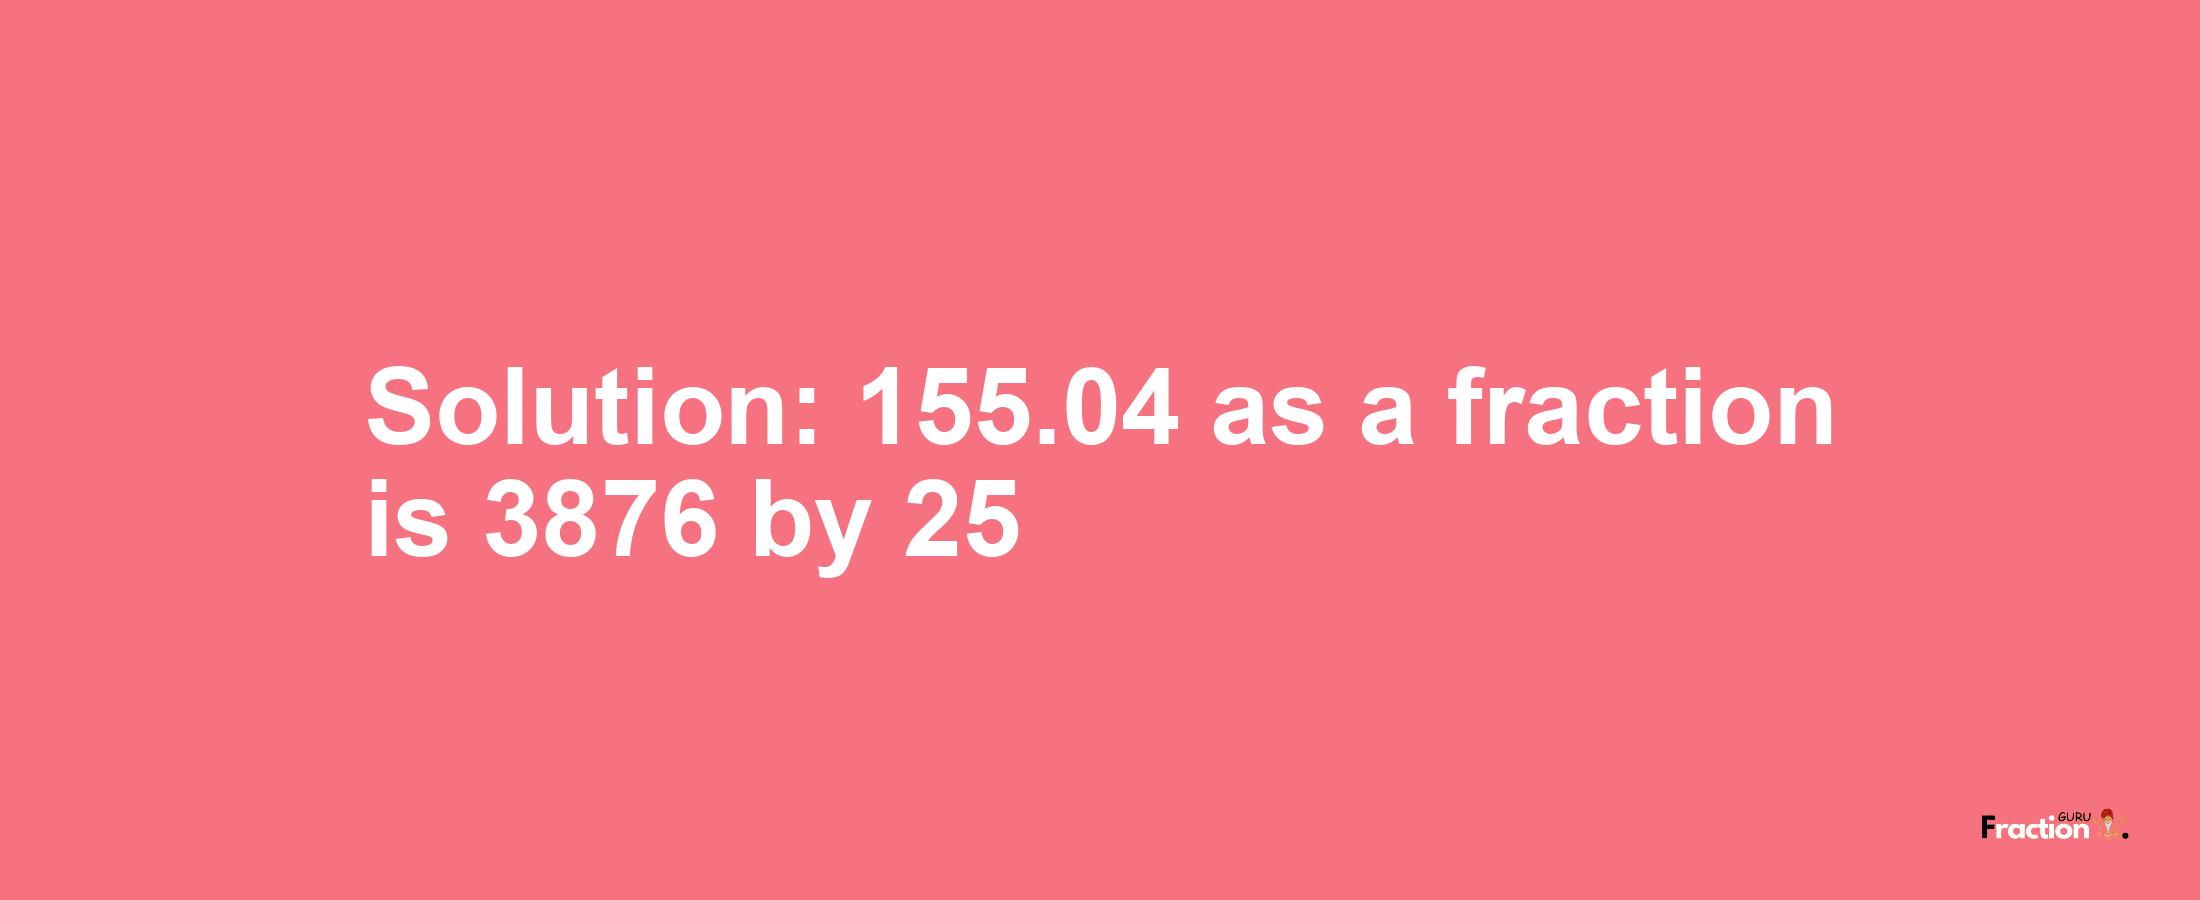 Solution:155.04 as a fraction is 3876/25